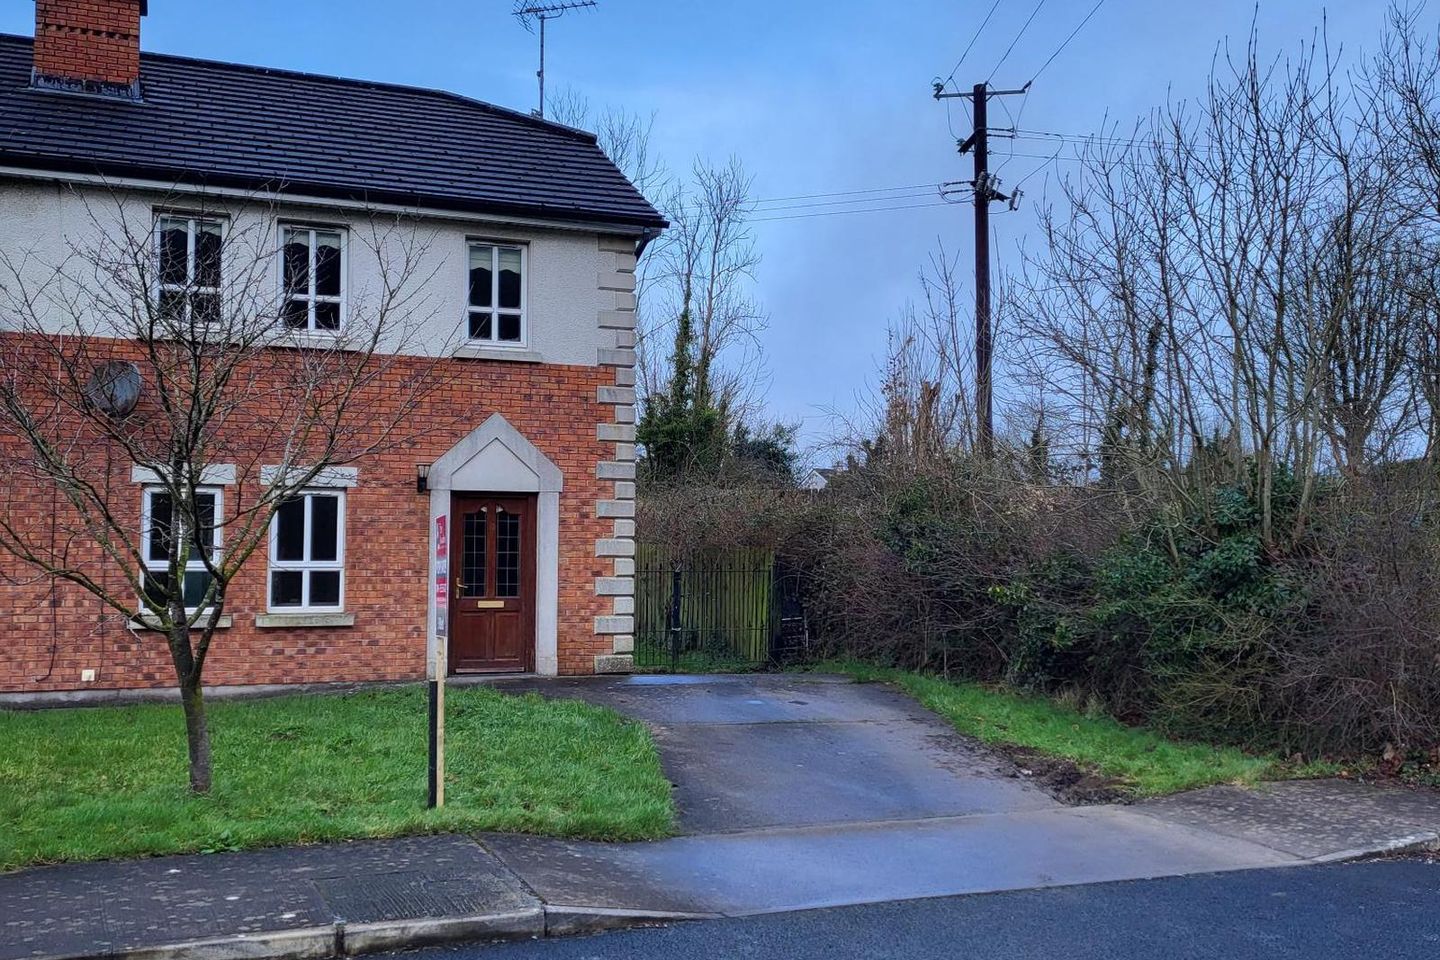 10 Clements Town, Cootehill, Co. Cavan, H16CY96